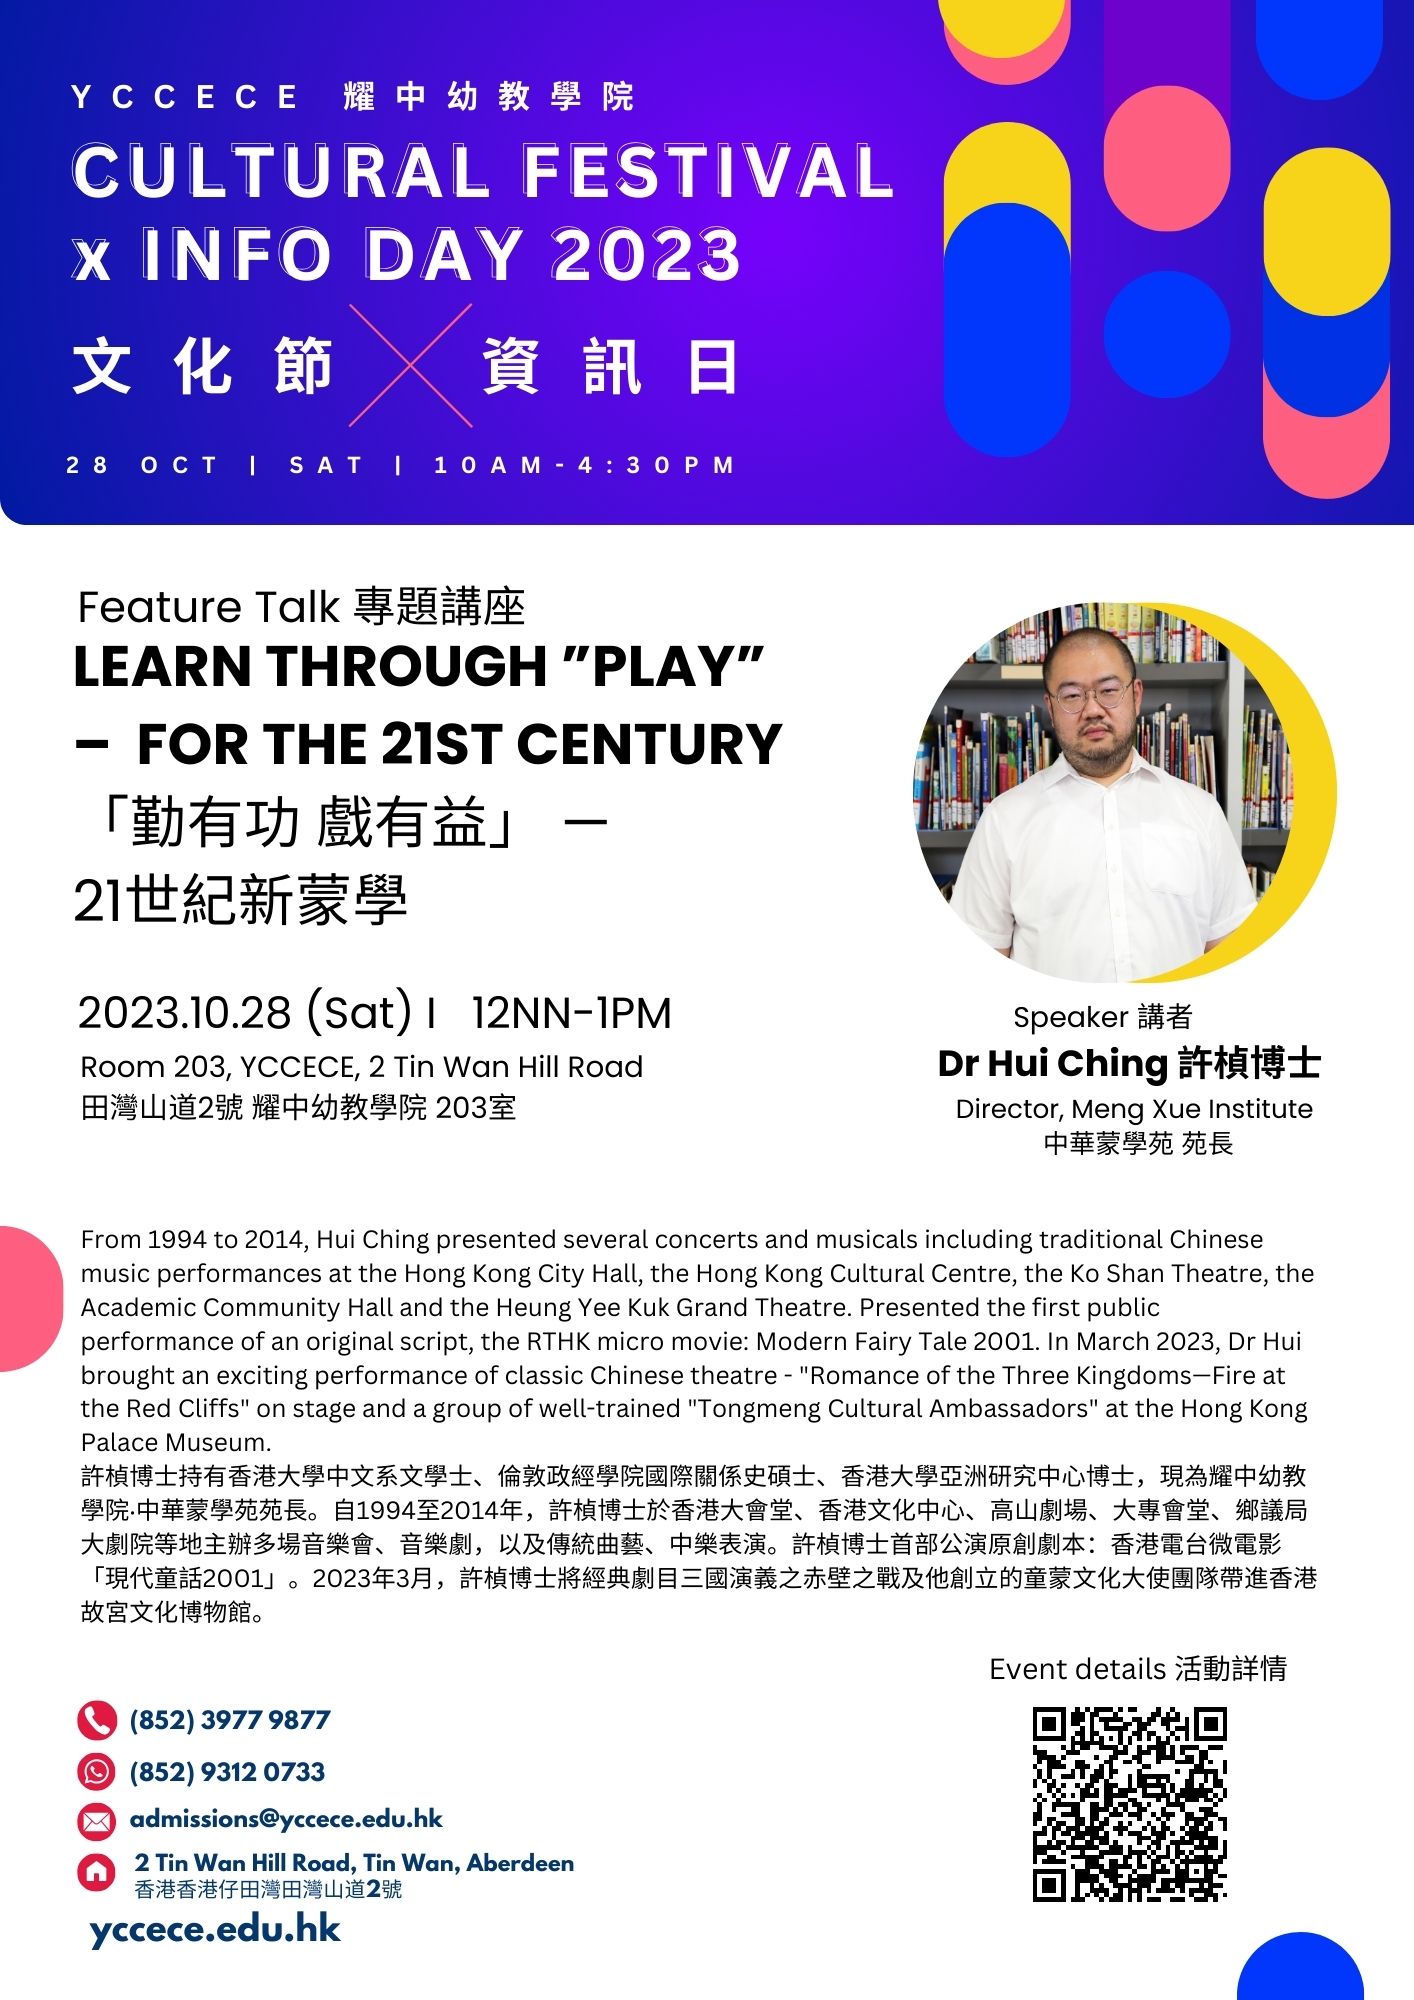 Learn Through "Play" - For the 21st Century